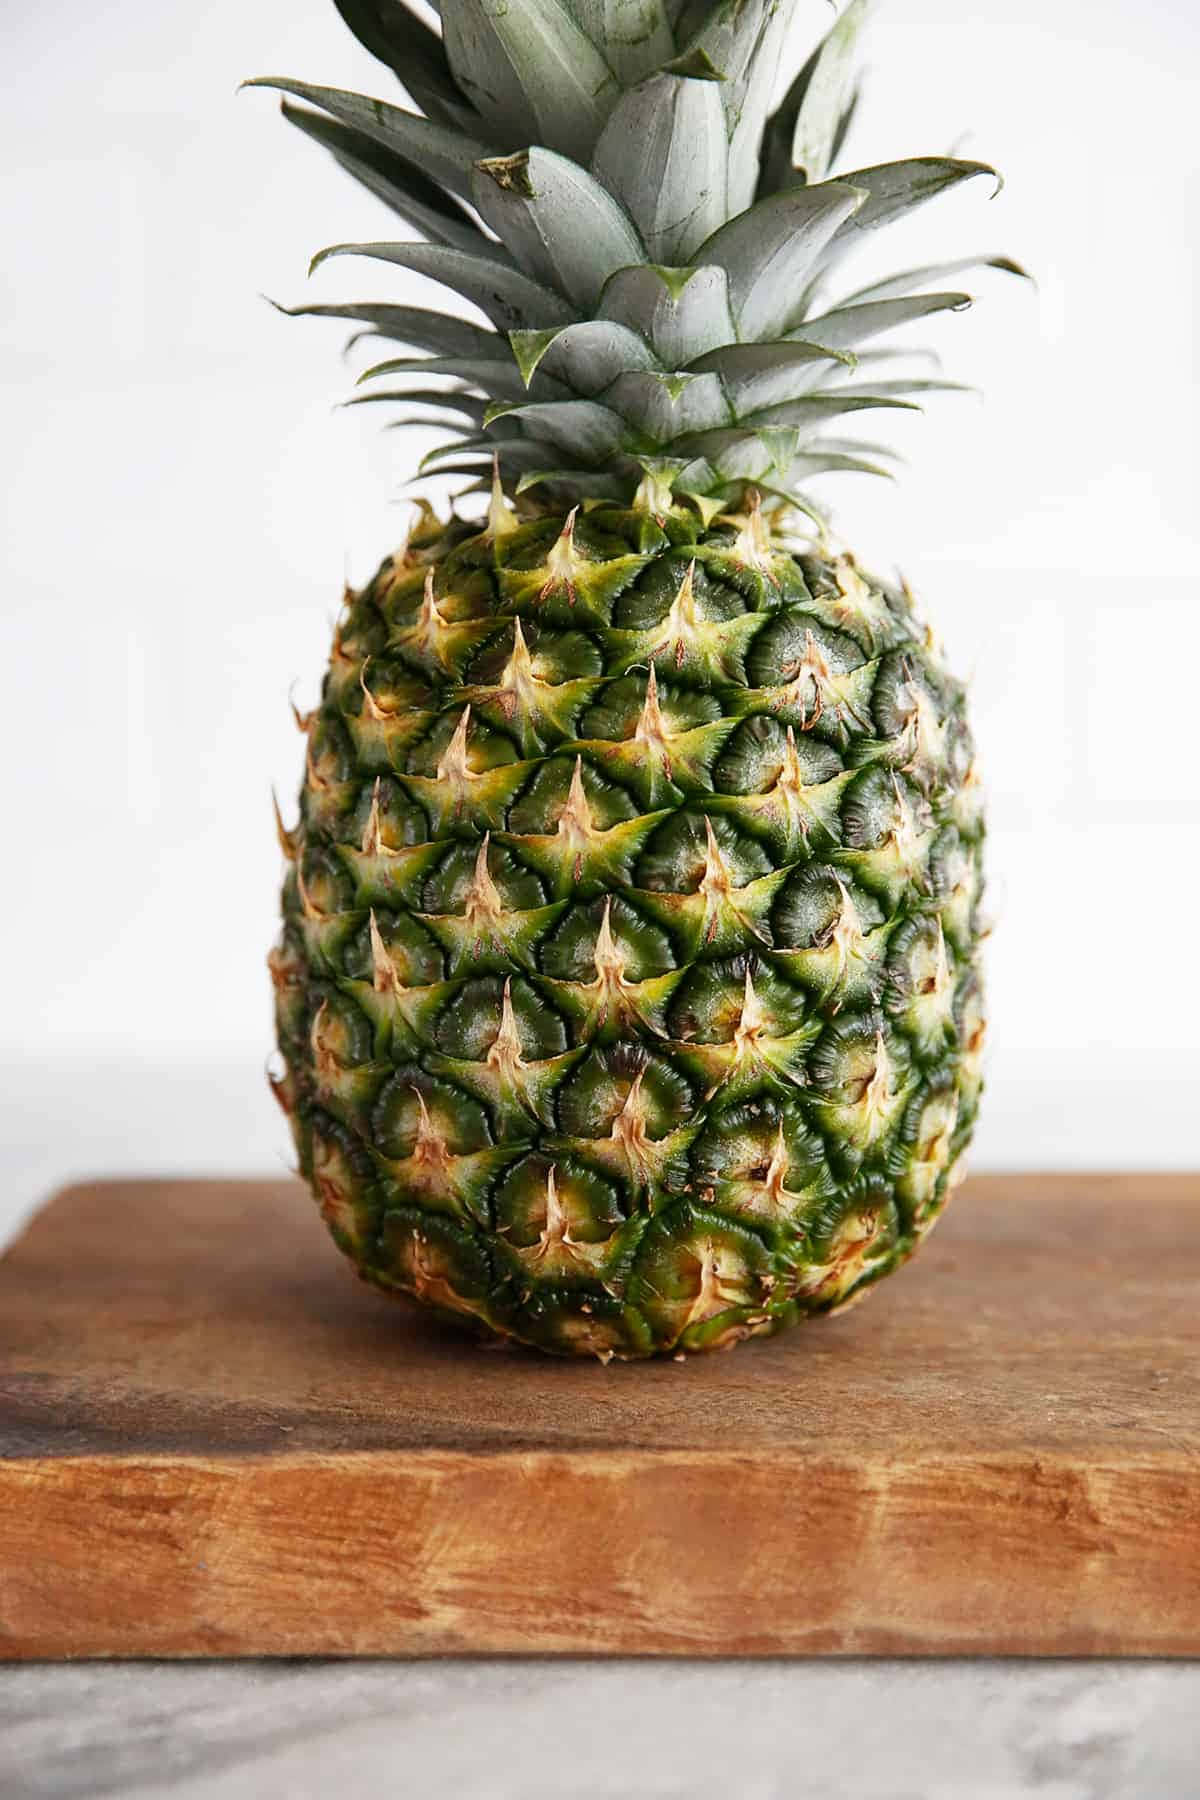 A juicy, sweet and light-colored pineapple